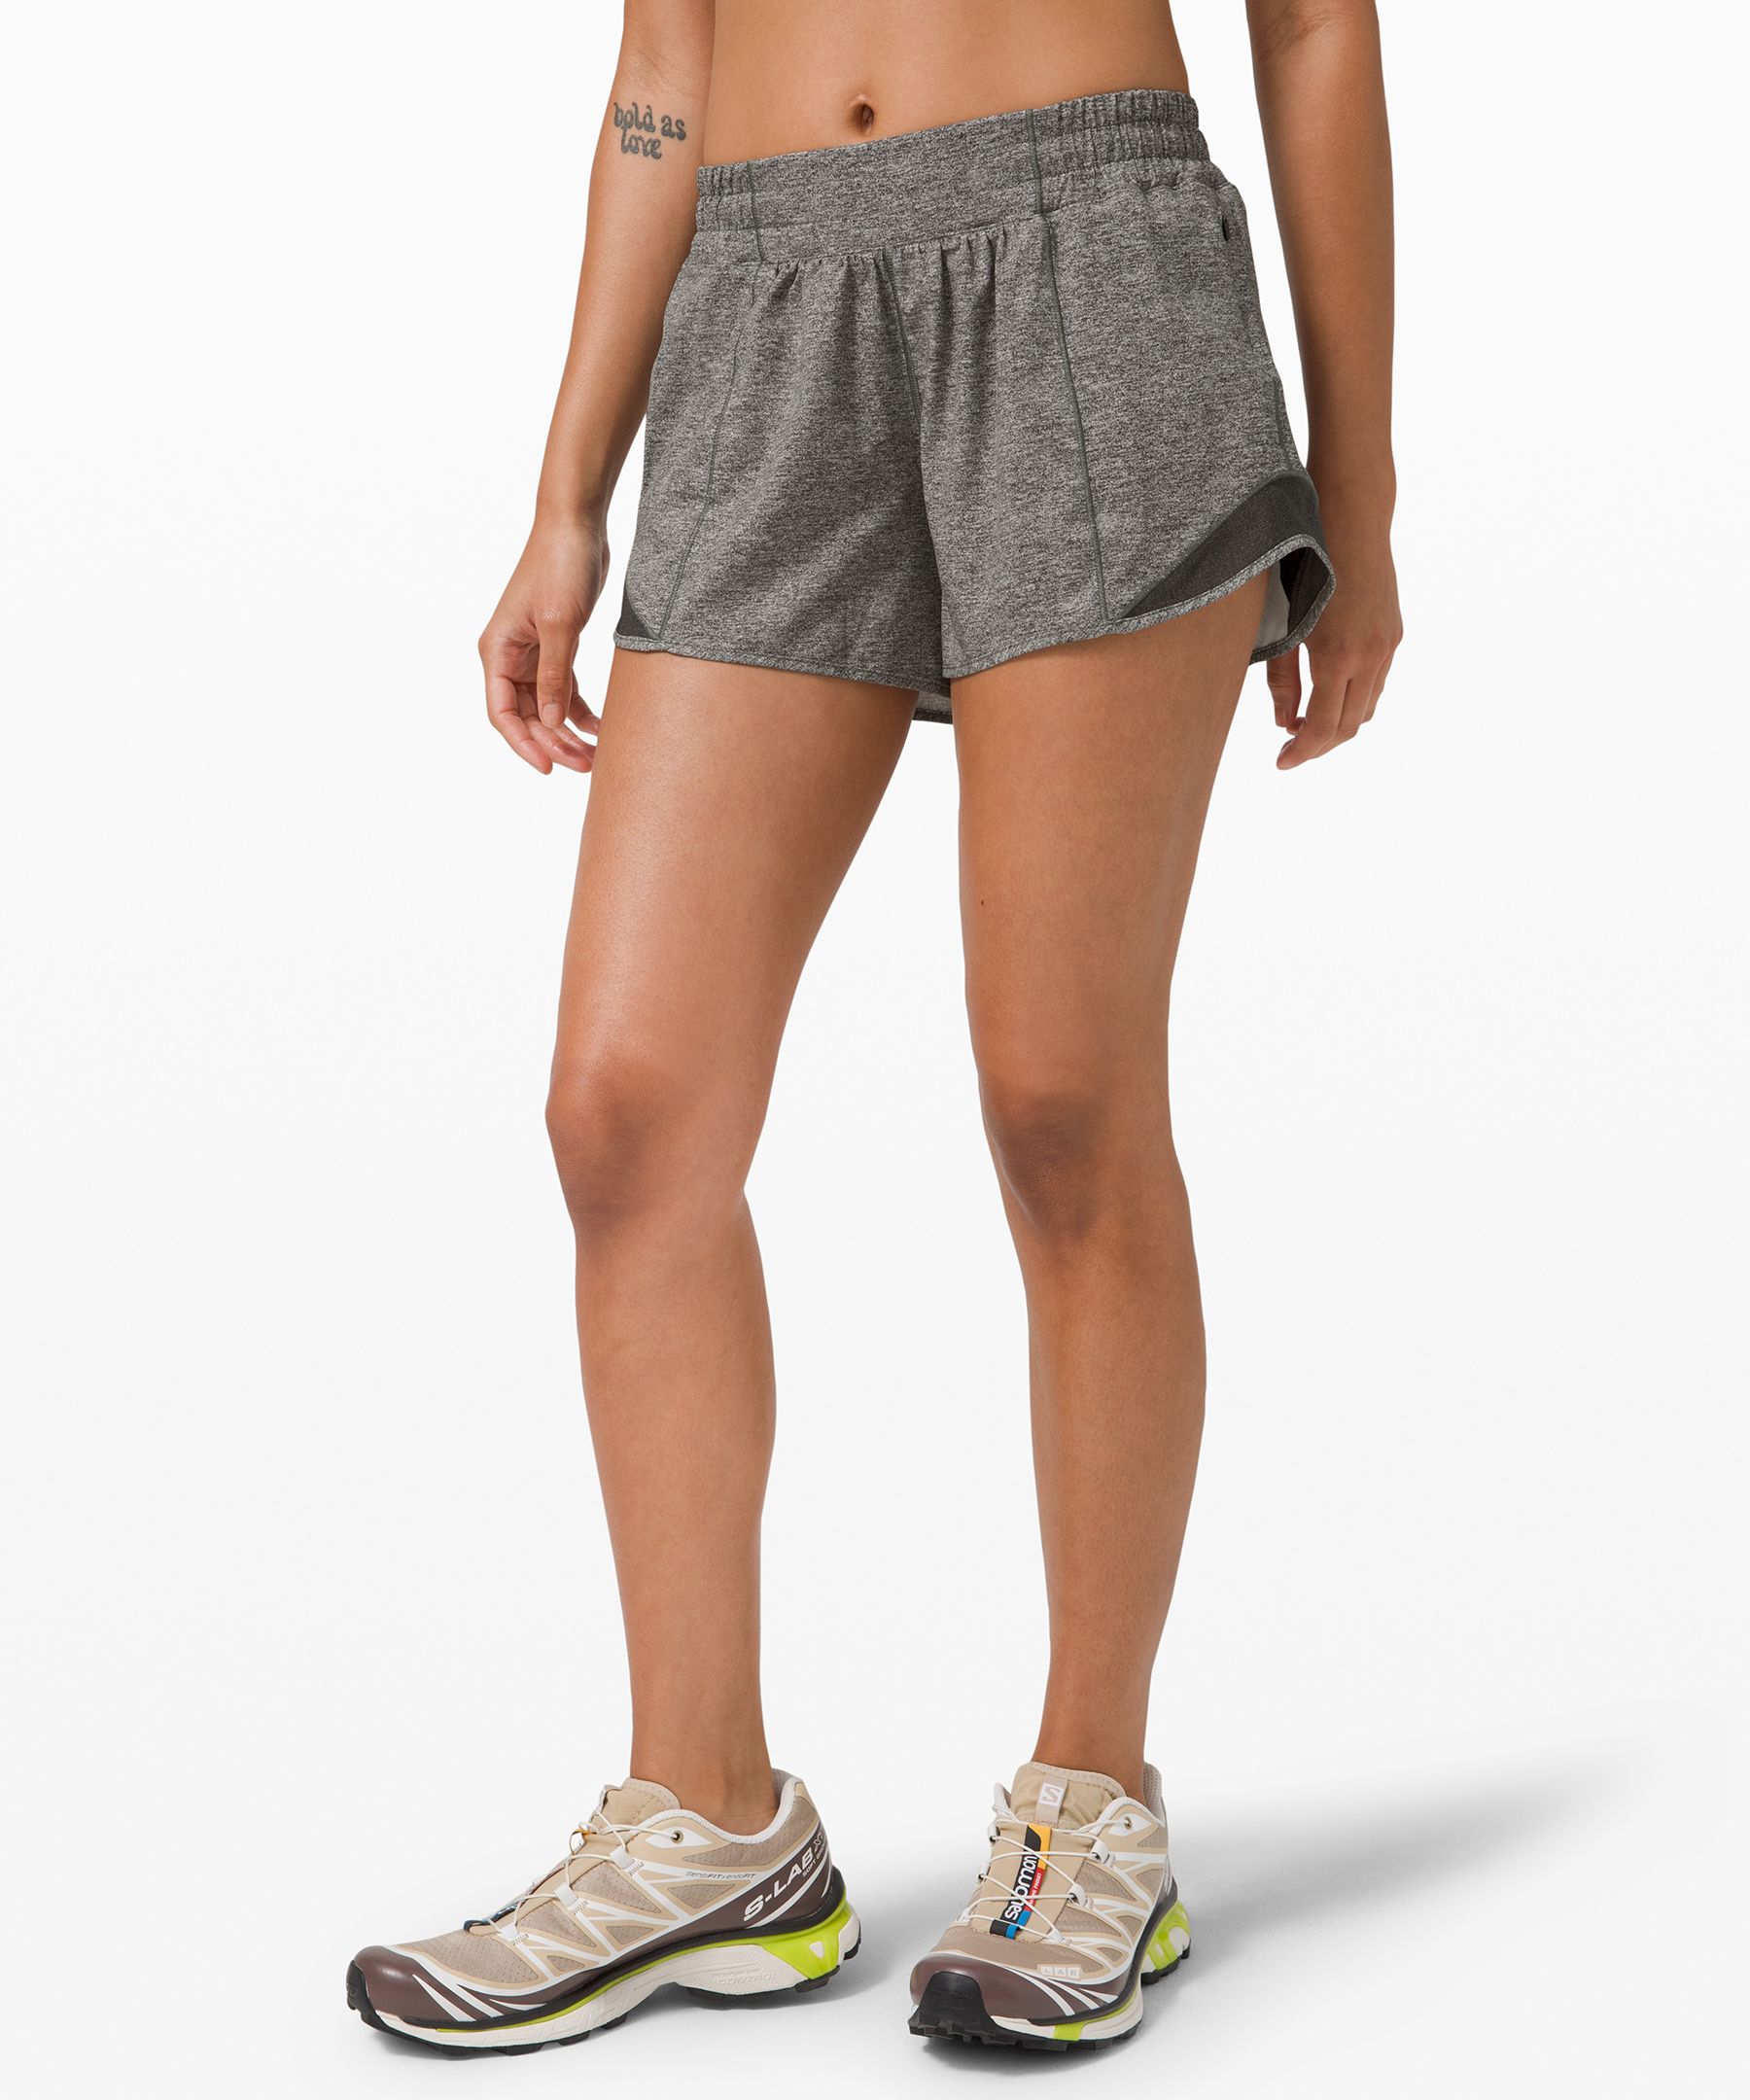 Lululemon Hotty Hot Low-rise Lined Shorts 4" In Heather Lux Black